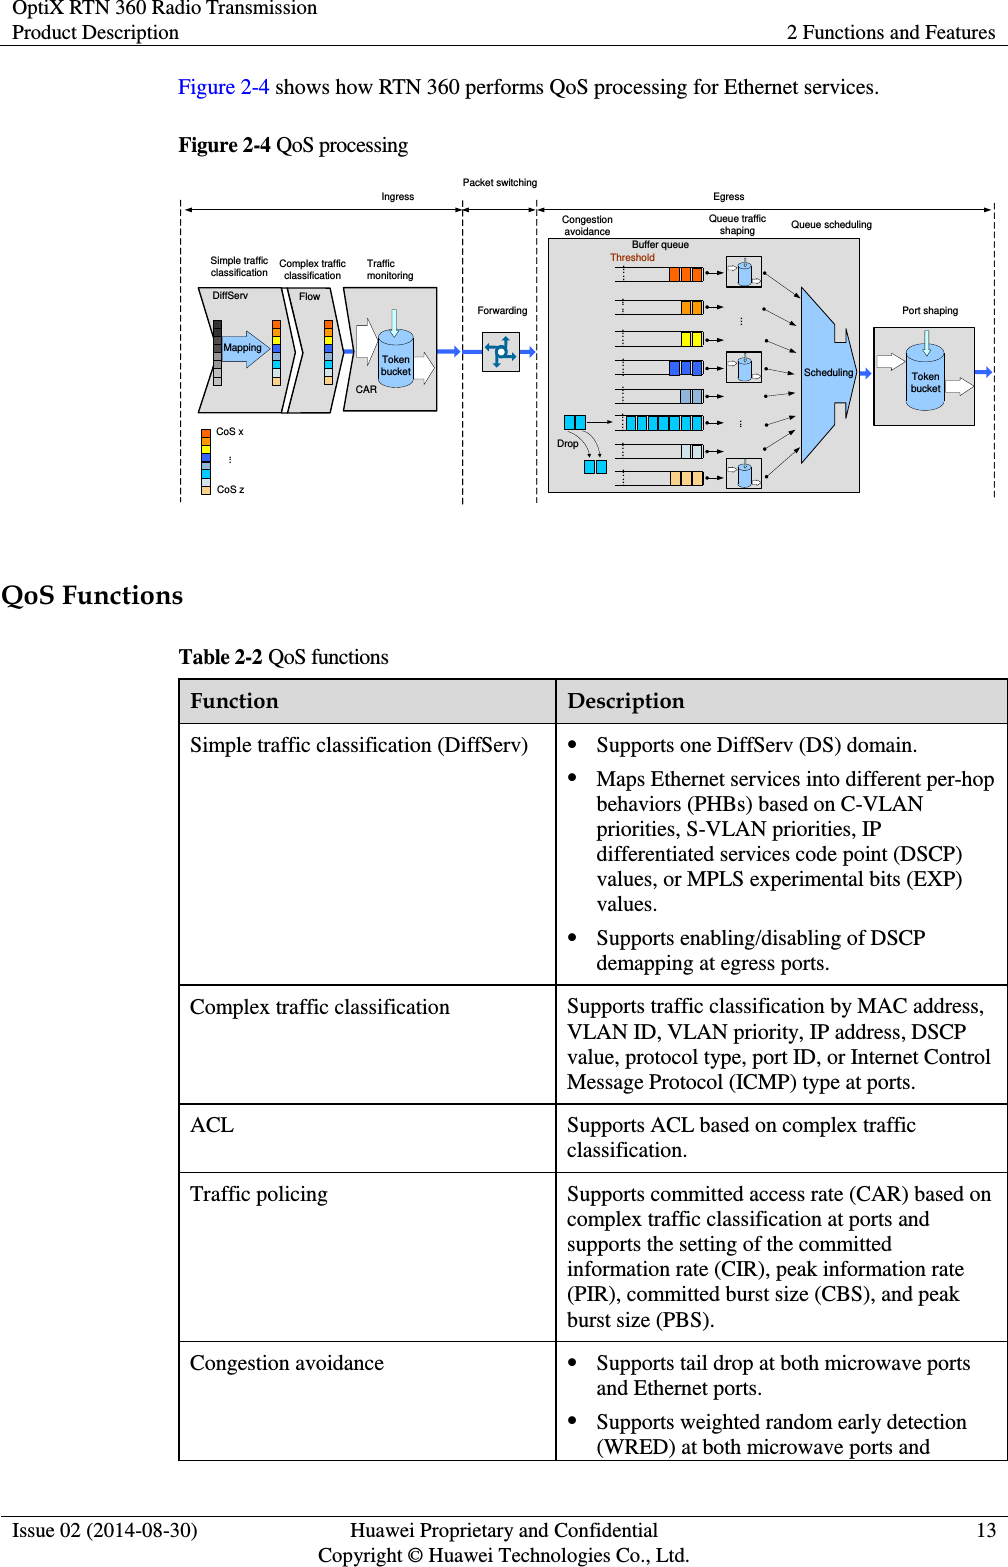 OptiX RTN 360 Radio Transmission Product Description 2 Functions and Features  Issue 02 (2014-08-30) Huawei Proprietary and Confidential                                     Copyright © Huawei Technologies Co., Ltd. 13  Figure 2-4 shows how RTN 360 performs QoS processing for Ethernet services. Figure 2-4 QoS processing ForwardingQueue schedulingIngress EgressPacket switchingCongestion avoidanceBuffer queueThresholdQueue trafficshapingSchedulingDrop.........Port shapingToken bucket... ... ... ............ ...... ..................Simple traffic classificationMappingDiffServCoS x...CoS zTraffic monitoringCARToken bucket FlowComplex traffic classification  QoS Functions Table 2-2 QoS functions Function Description Simple traffic classification (DiffServ)  Supports one DiffServ (DS) domain.  Maps Ethernet services into different per-hop behaviors (PHBs) based on C-VLAN priorities, S-VLAN priorities, IP differentiated services code point (DSCP) values, or MPLS experimental bits (EXP) values.  Supports enabling/disabling of DSCP demapping at egress ports.   Complex traffic classification Supports traffic classification by MAC address, VLAN ID, VLAN priority, IP address, DSCP value, protocol type, port ID, or Internet Control Message Protocol (ICMP) type at ports. ACL Supports ACL based on complex traffic classification.   Traffic policing Supports committed access rate (CAR) based on complex traffic classification at ports and supports the setting of the committed information rate (CIR), peak information rate (PIR), committed burst size (CBS), and peak burst size (PBS). Congestion avoidance  Supports tail drop at both microwave ports and Ethernet ports.  Supports weighted random early detection (WRED) at both microwave ports and 